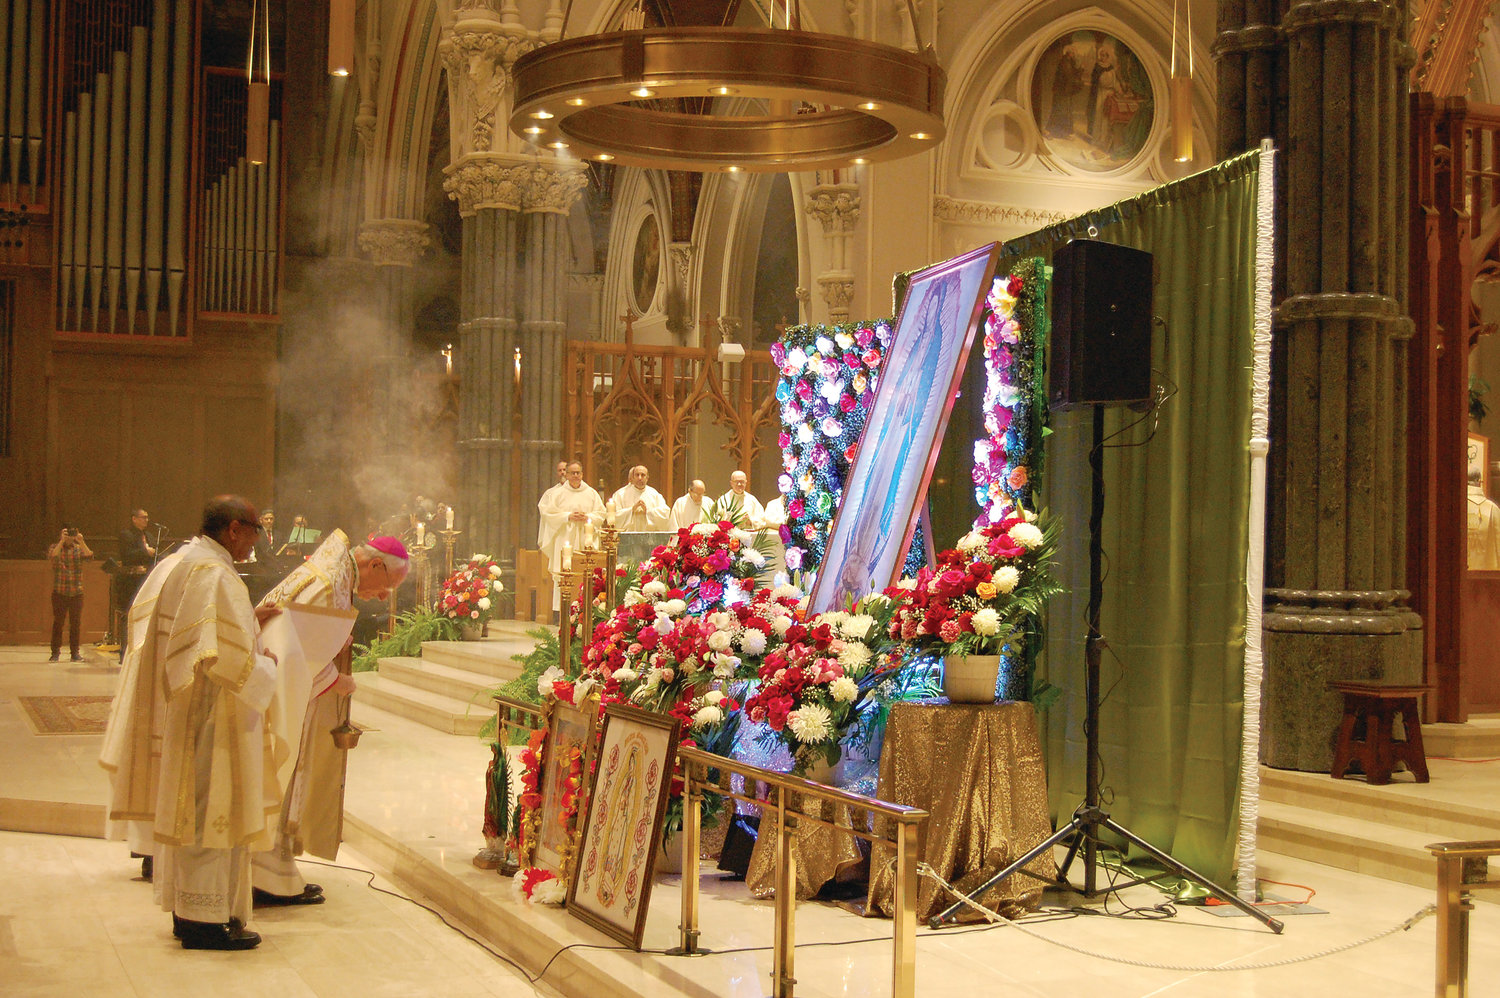 Bishop Robert C. Evans venerates an image of Our Lady of Guadalupe during Mass celebrated on Dec. 12.